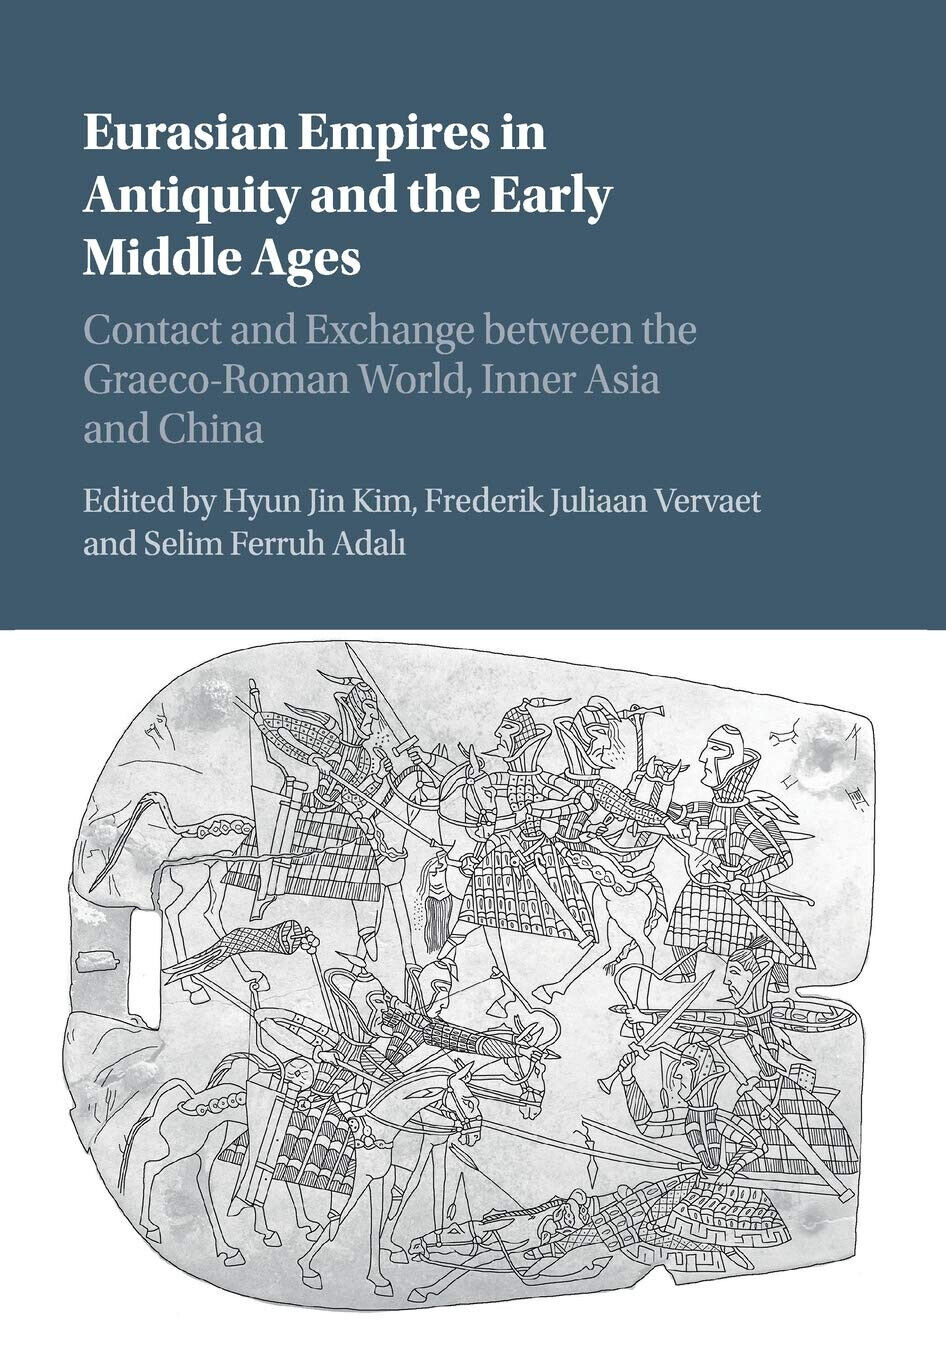 Eurasian Empires In Antiquity And The Early Middle Ages - Hyun Jin Kim - 2020 libro usato